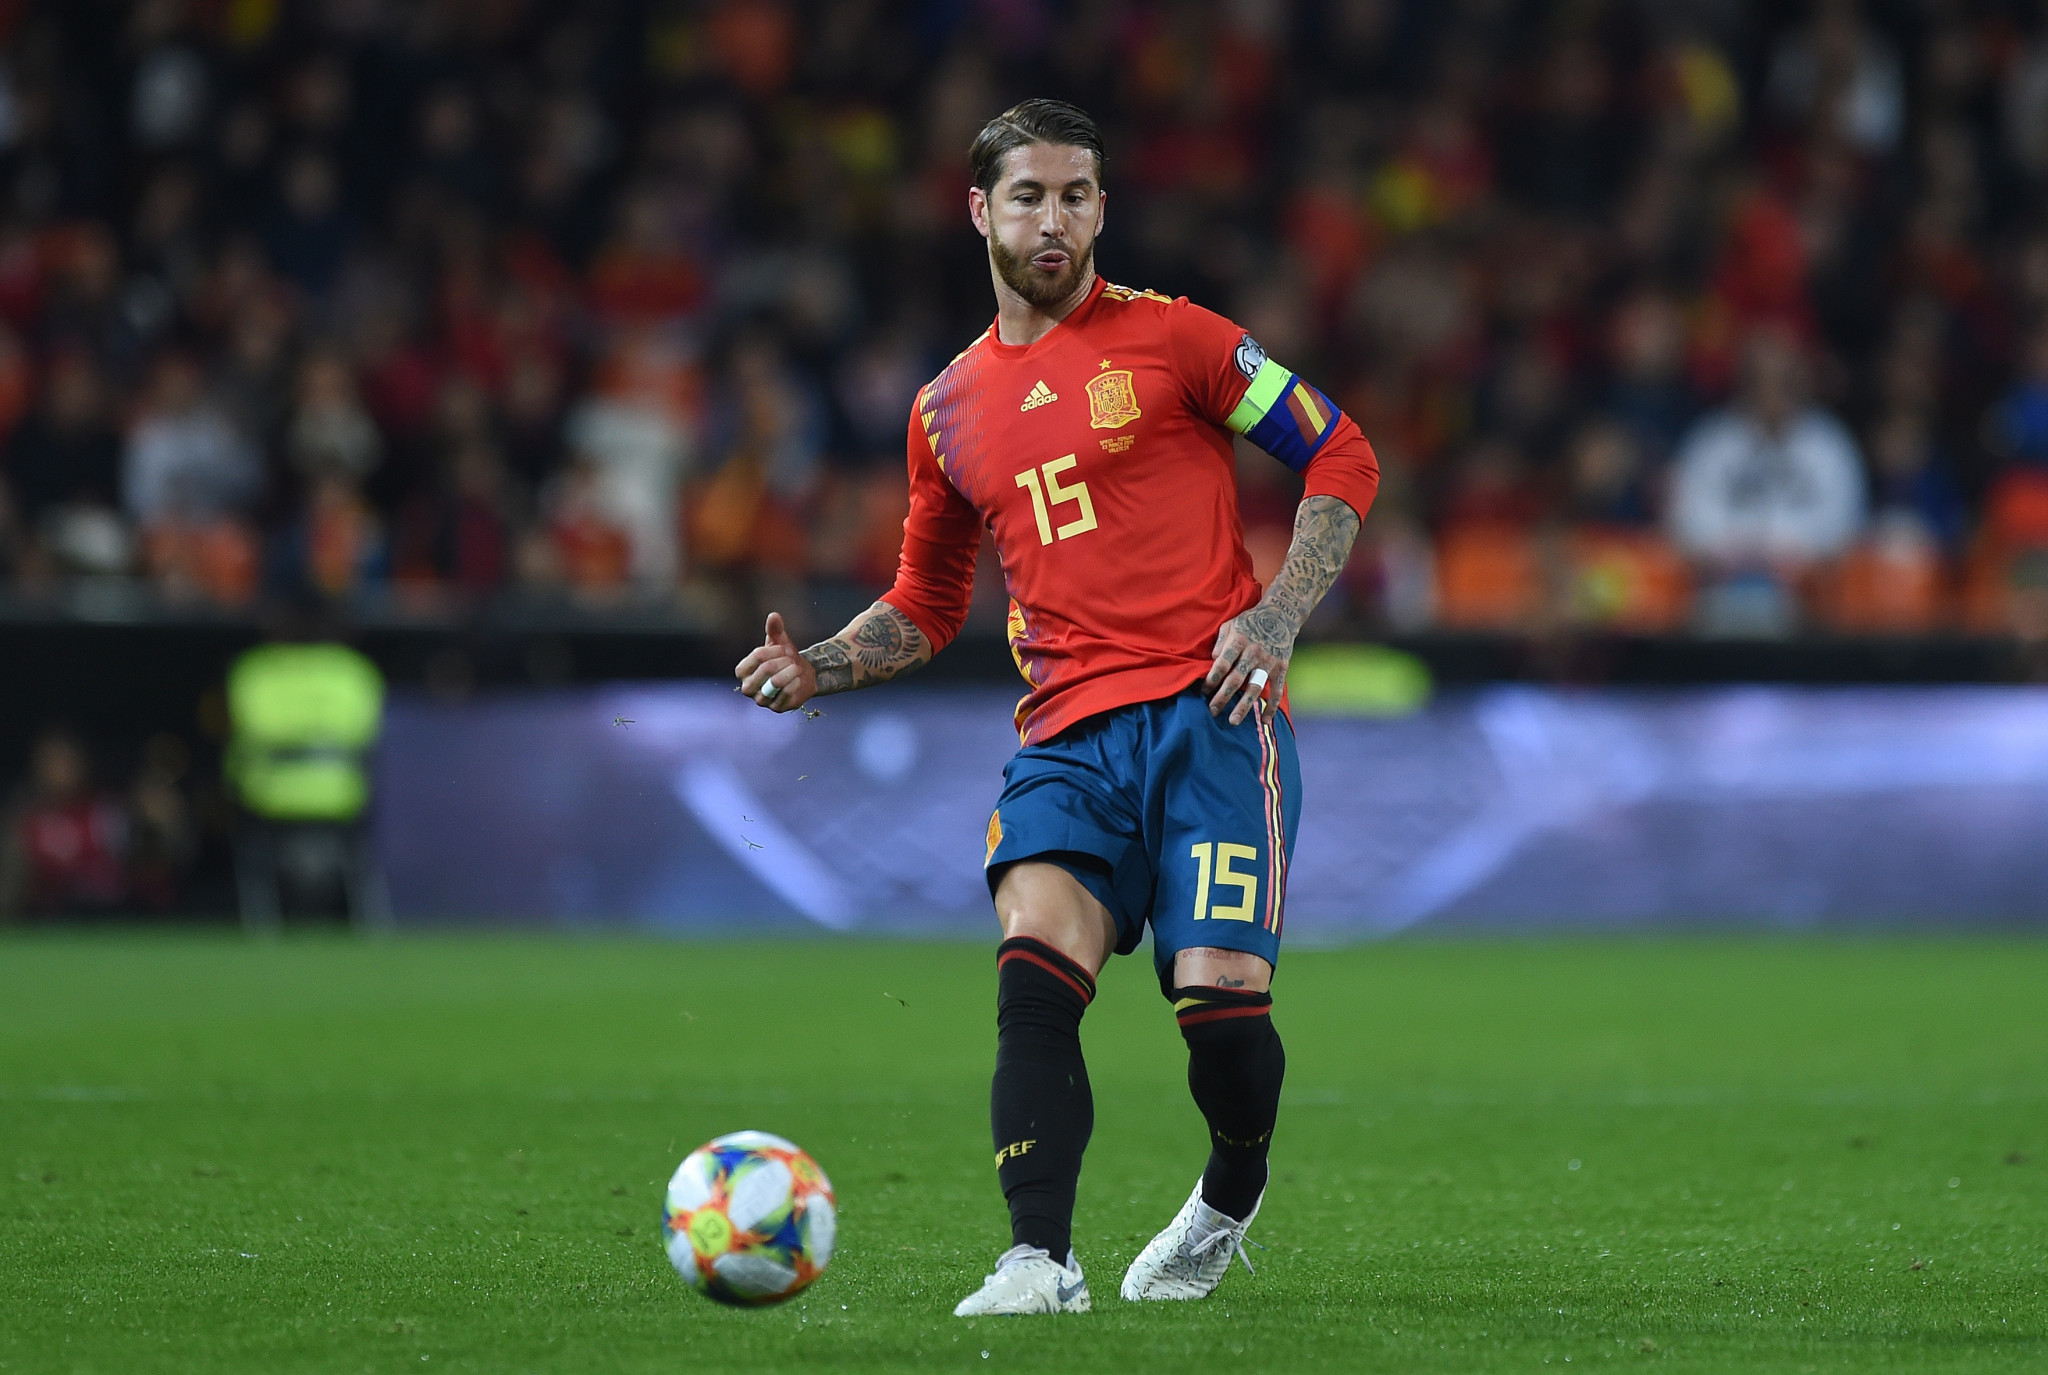 Ramos hints at wish to represent Spain in Olympic football event at Tokyo 2020